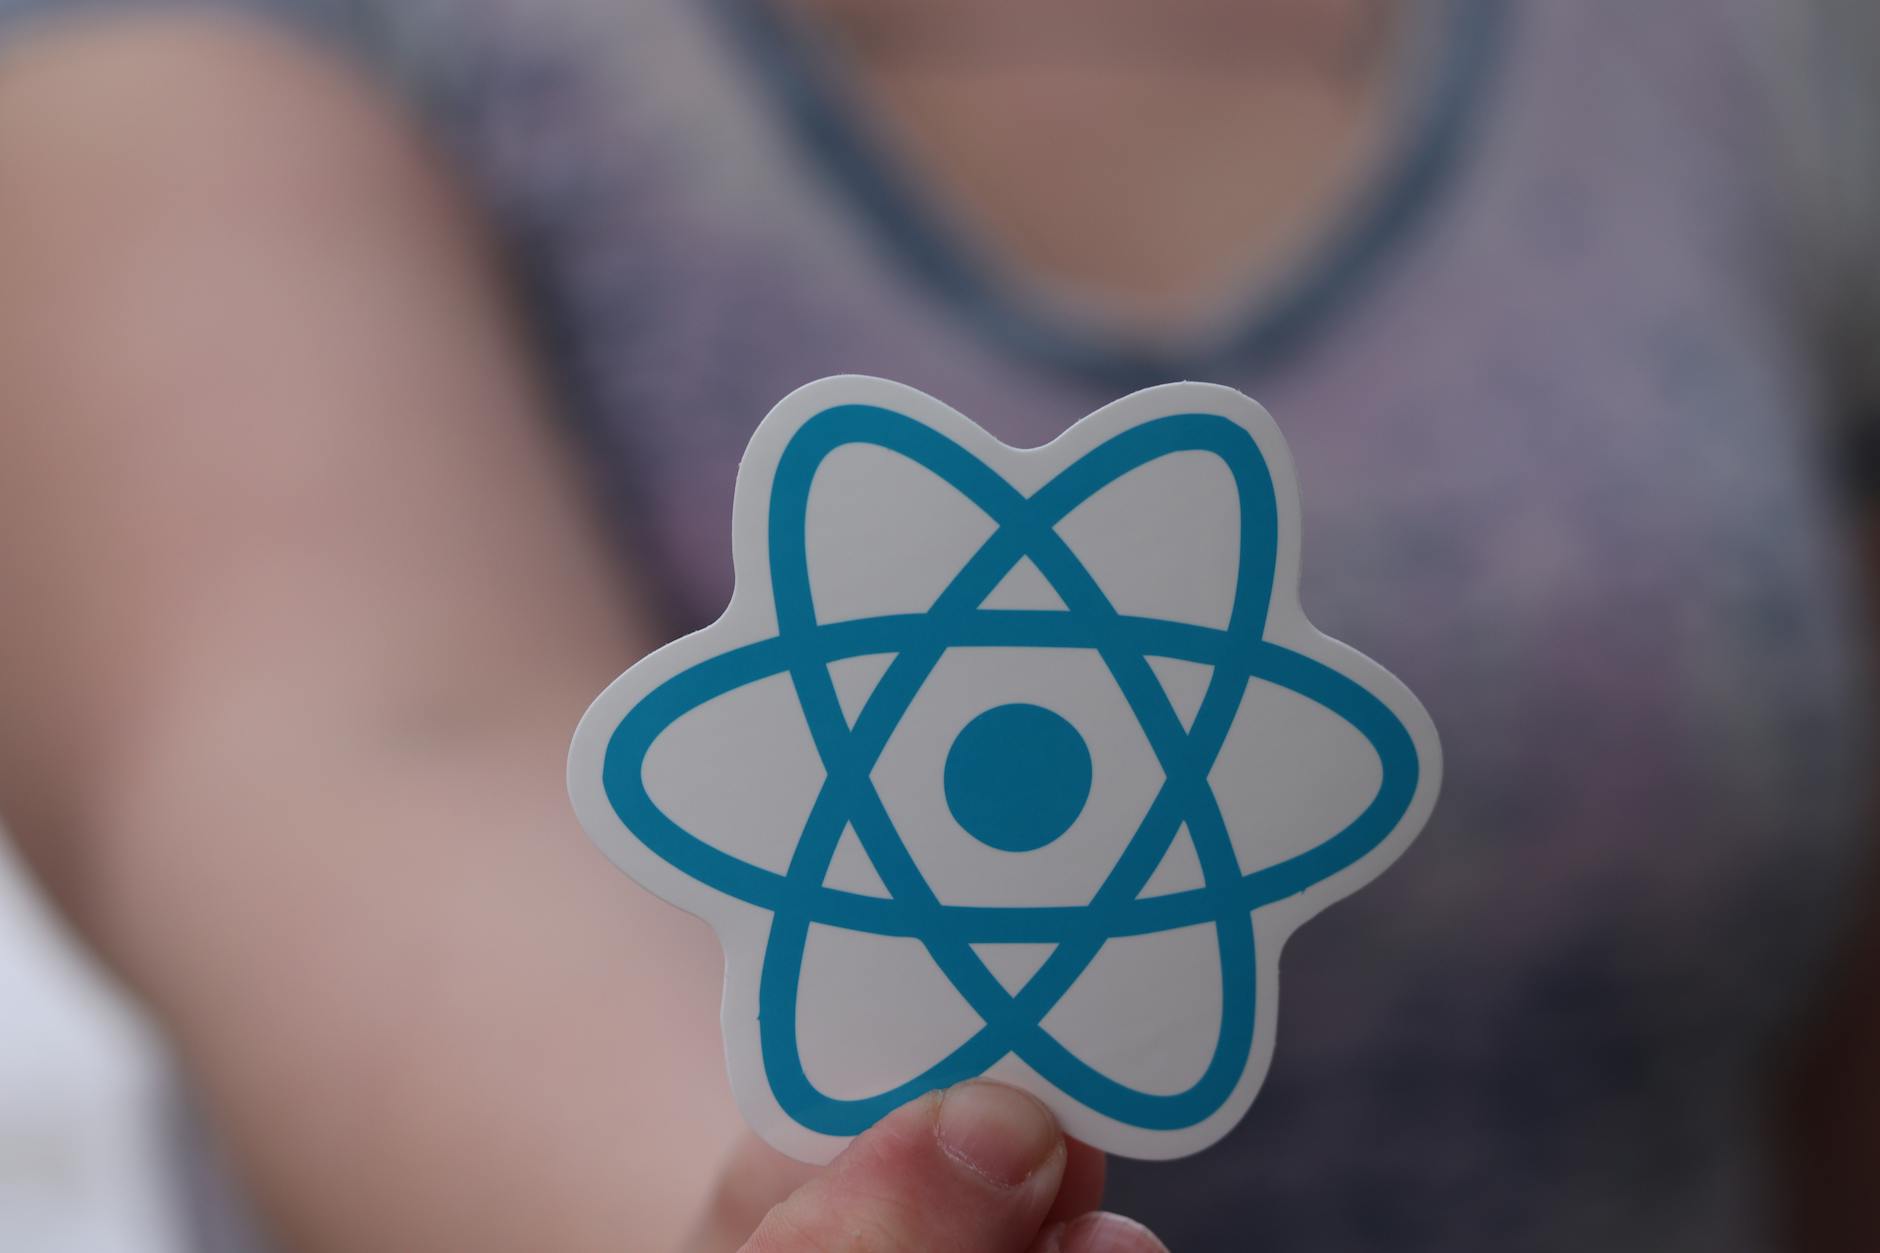 Easily Understanding the React Compiler’s Type System